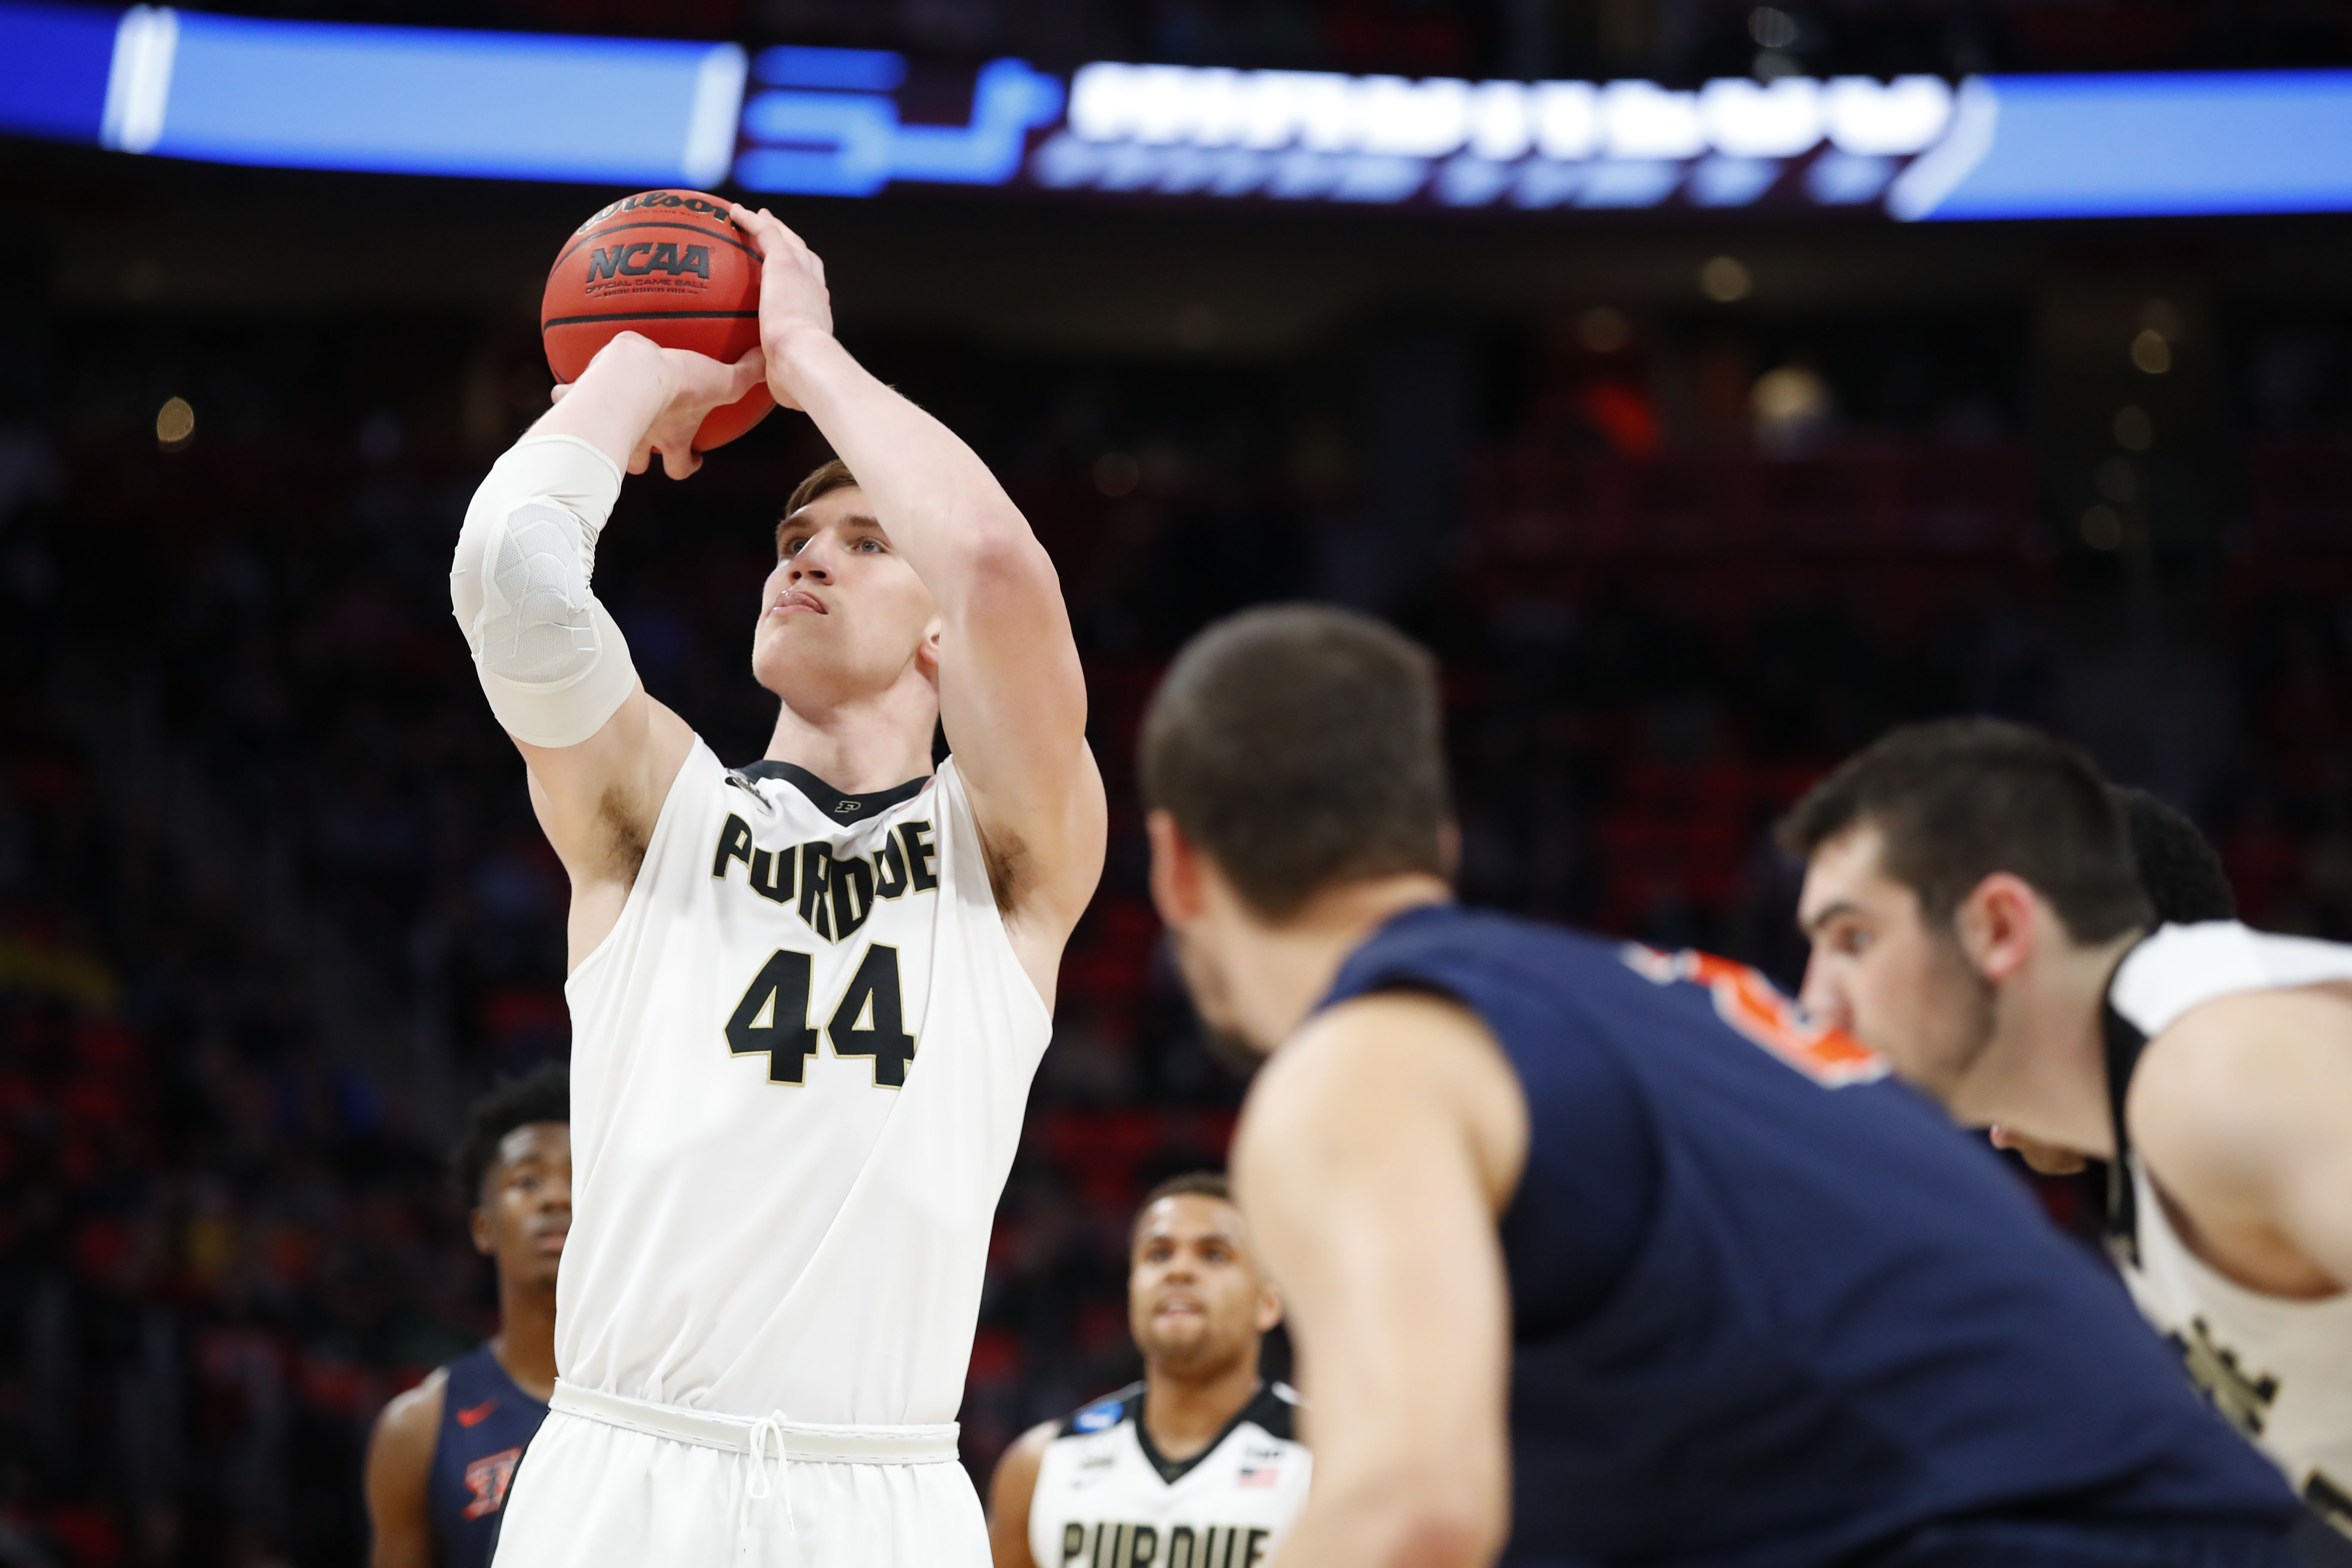 NCAA Basketball: NCAA Tournament-First Round: Purdue Boilermakers vs. Cal State Fullerton Titans 